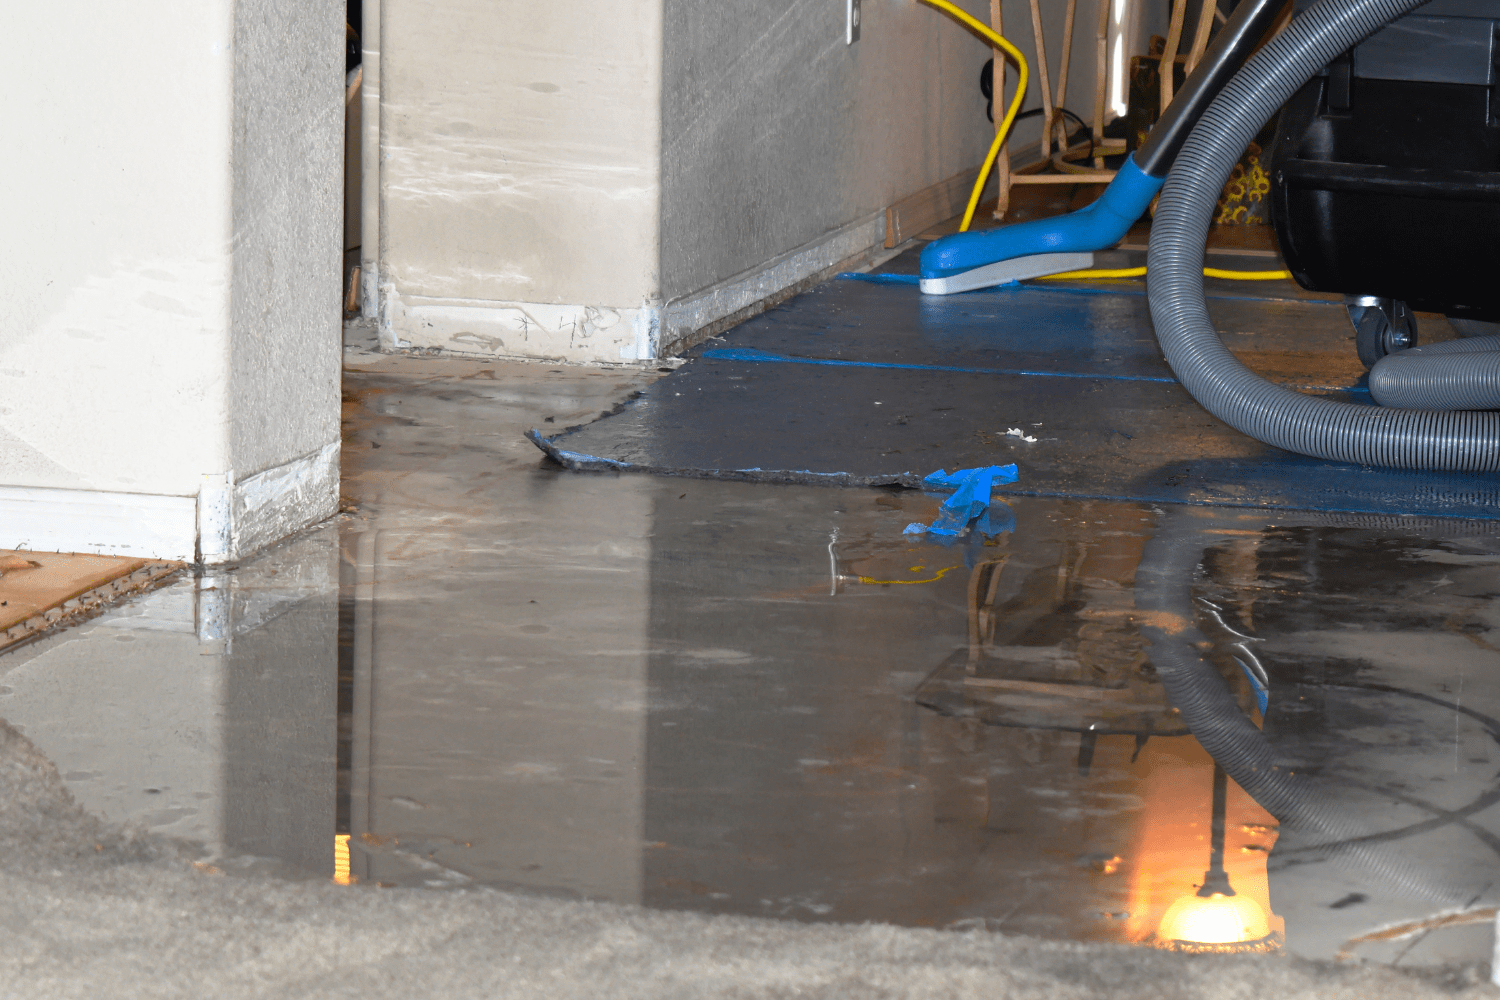 How Do You Know If You Have Water Damage